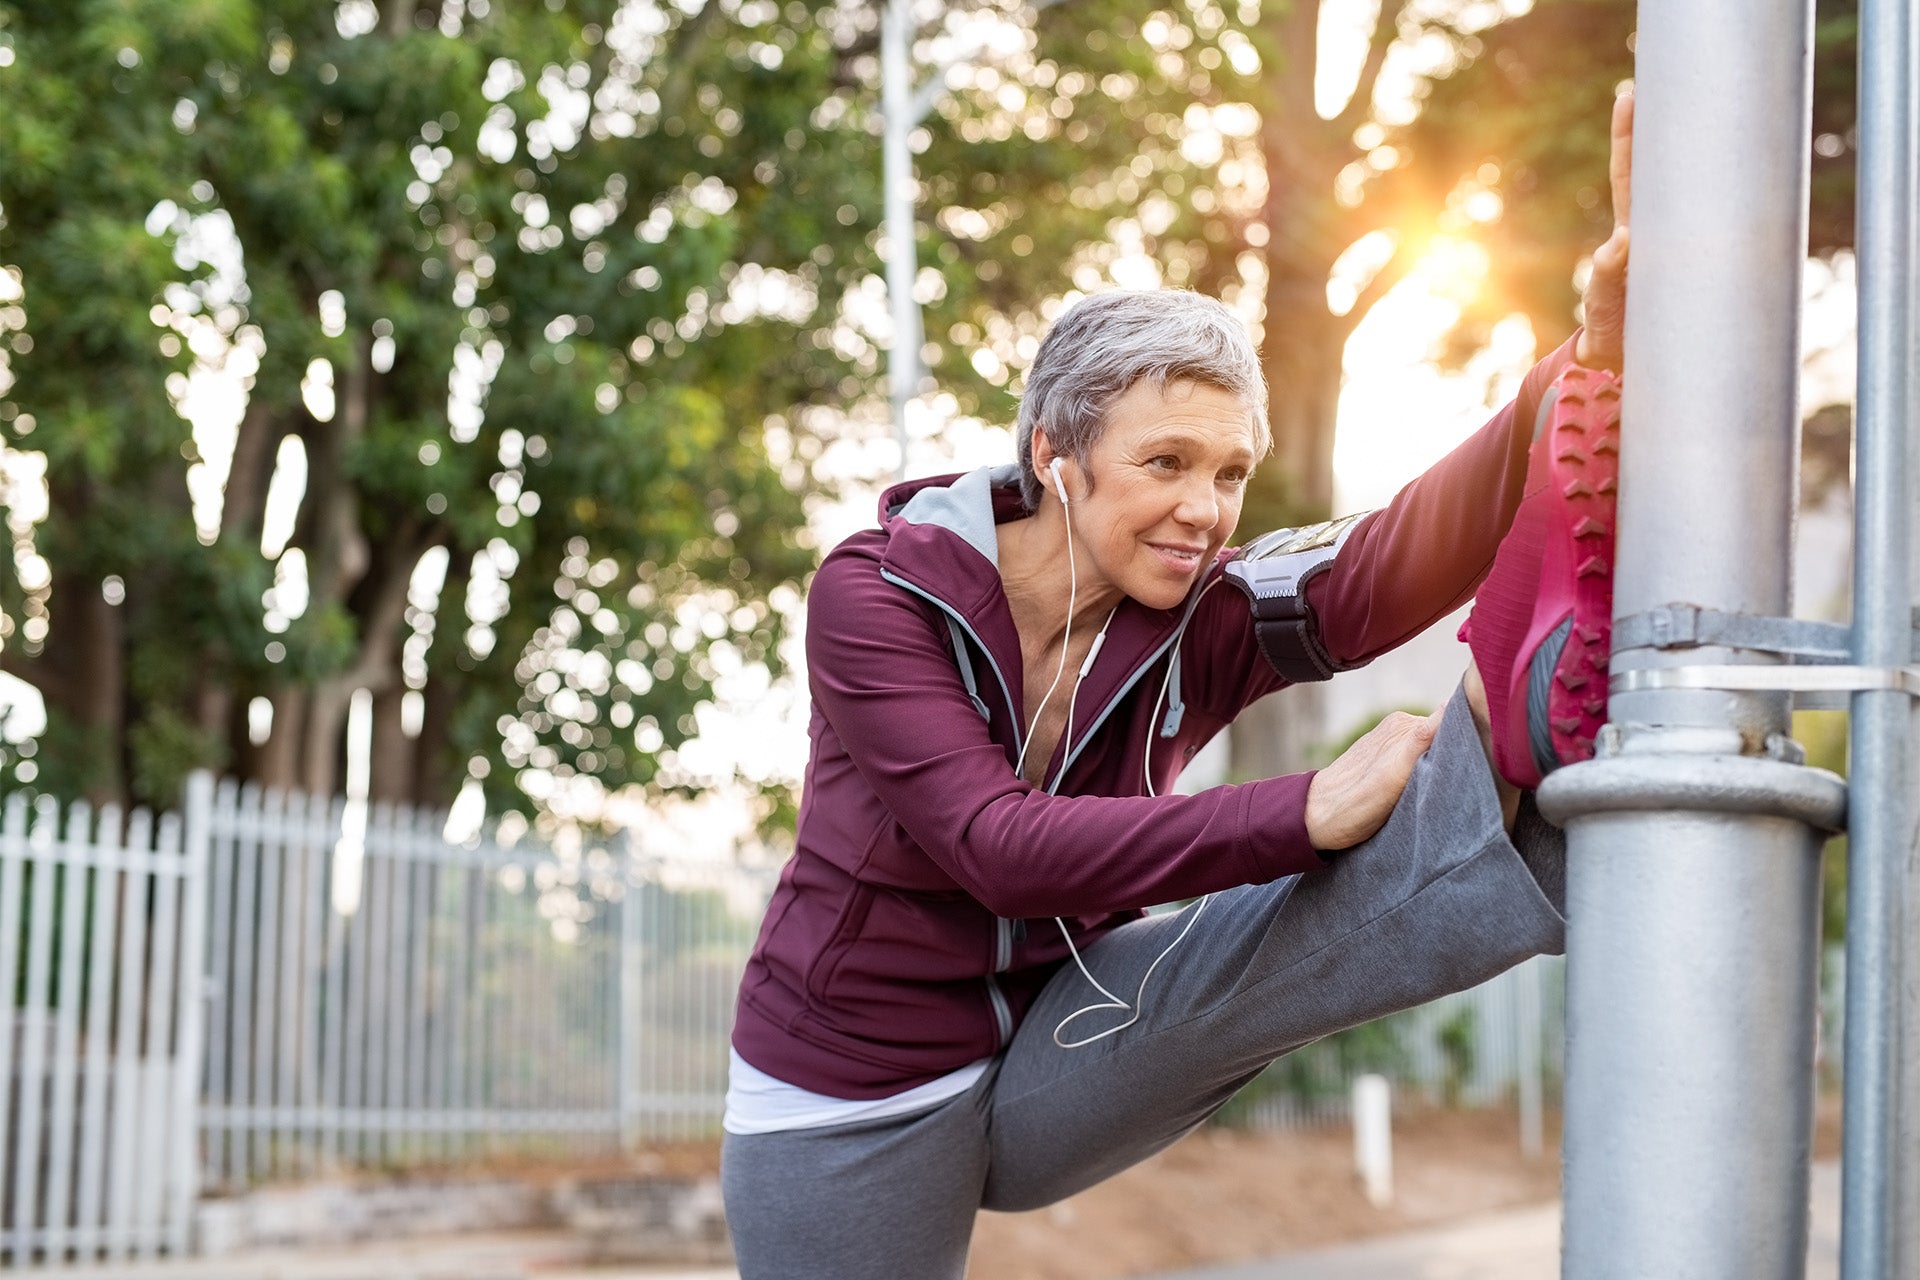 How Taking Care of Your Joint Health Can Improve Your Quality of Life